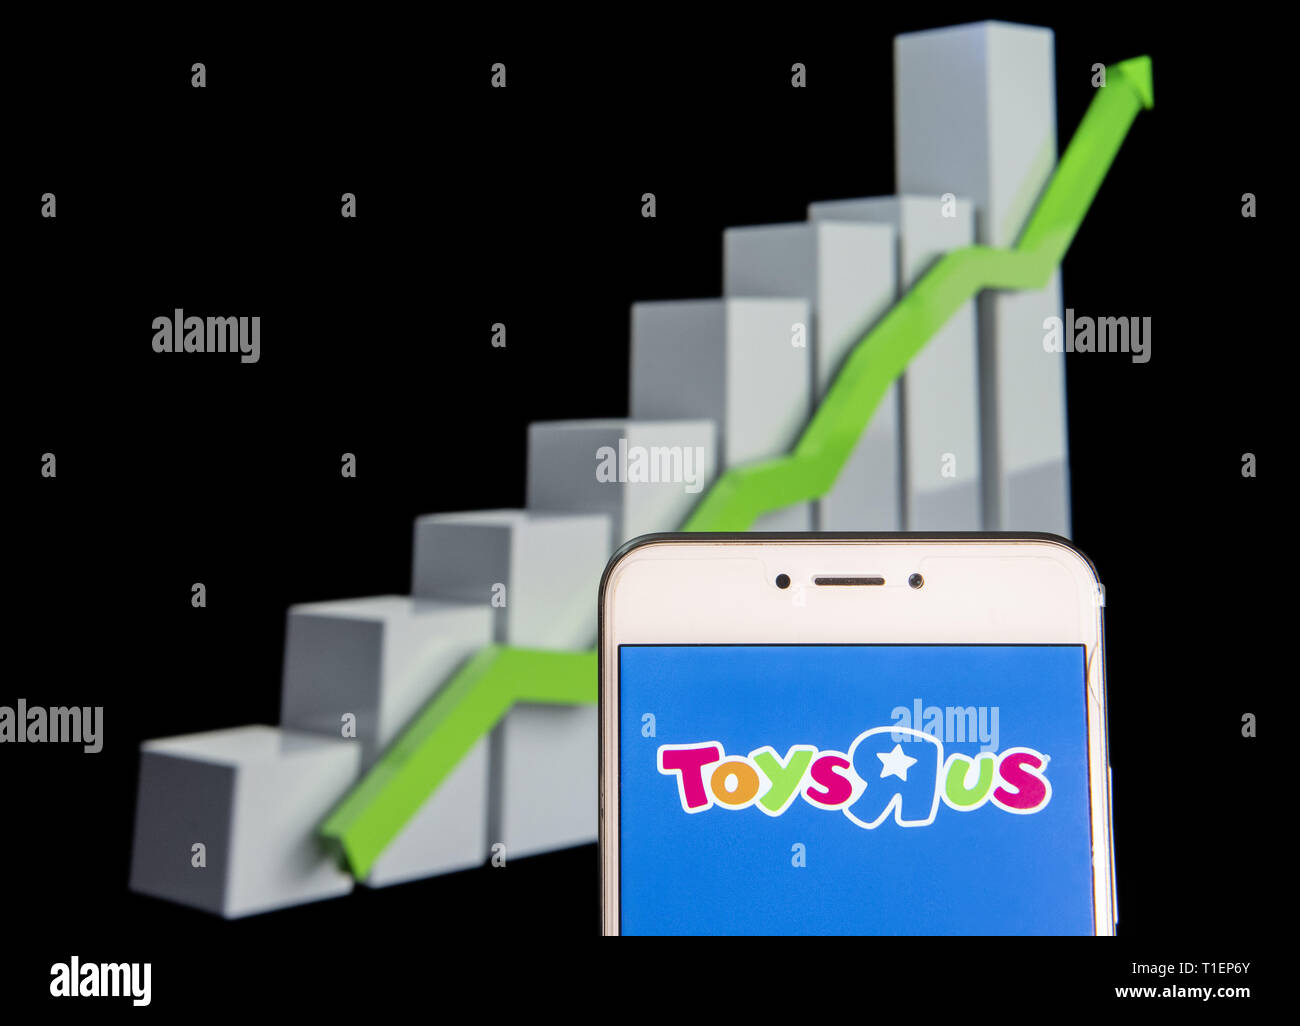 Toys R Us Stock Chart